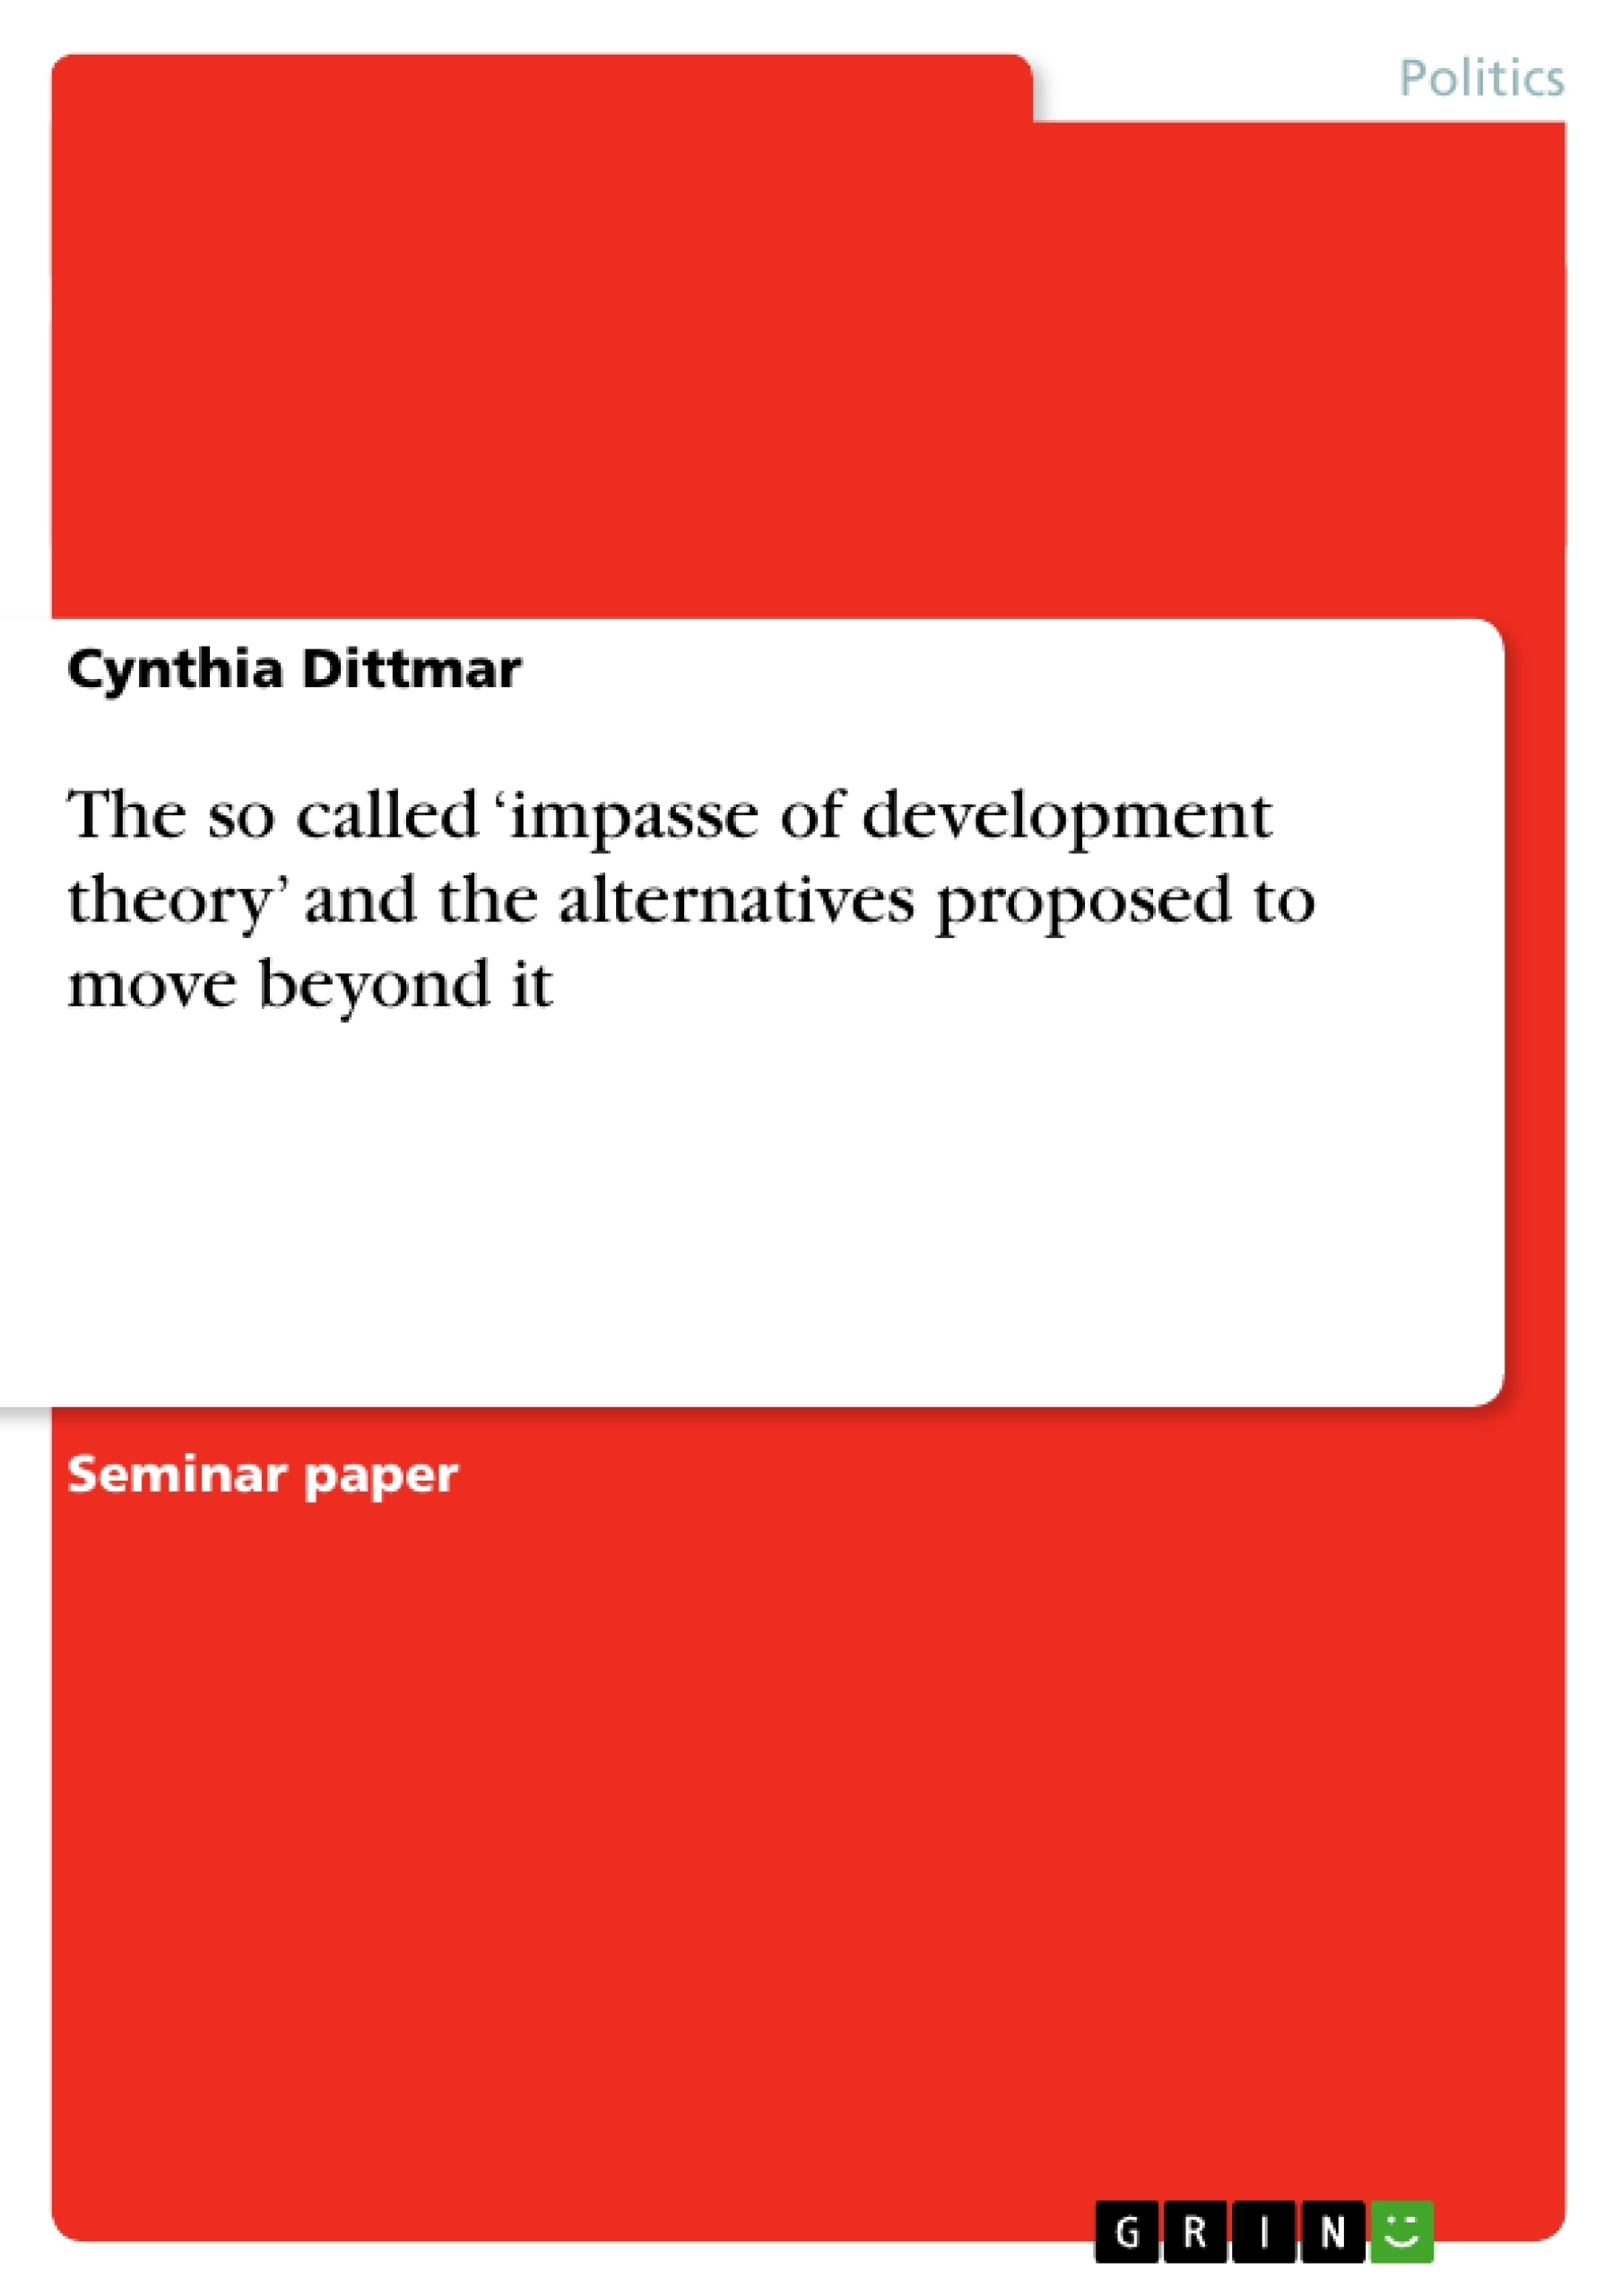 Title: The so called ‘impasse of development theory’ and the alternatives proposed to move beyond it